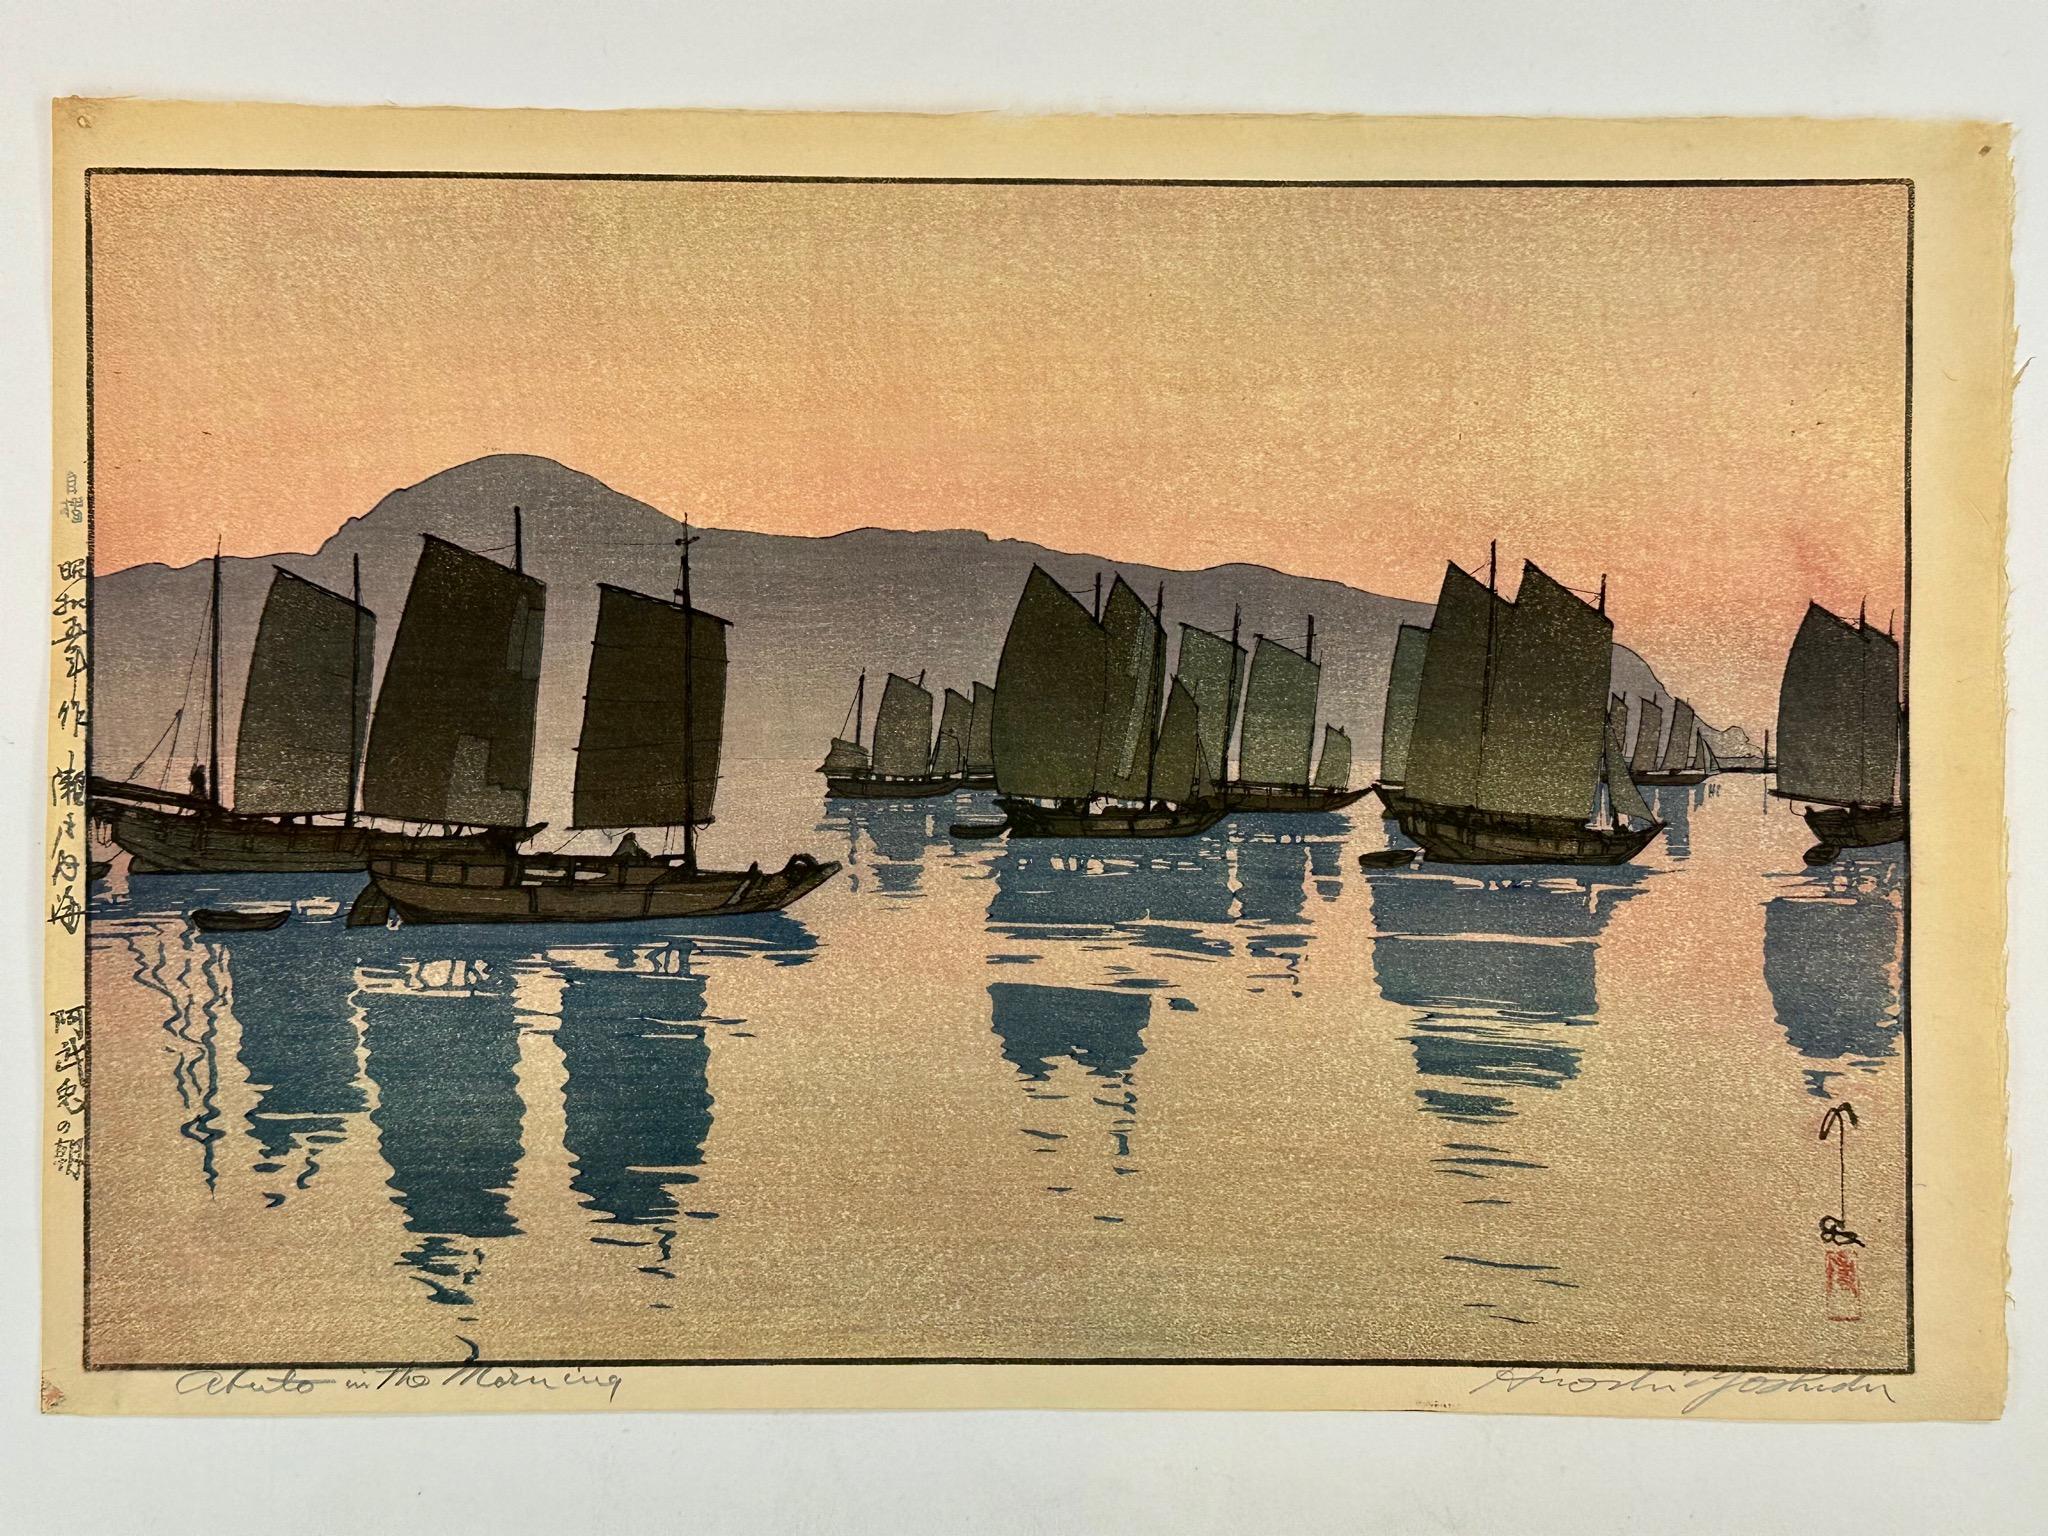 Available from Shogun's Gallery in Portland, Oregon for Over 40 &ears Specializing in Asian Arts & Antiques.

By Hiroshi Yoshida (1876-1950) dated 1930. Signed original.

Titled: Abuto in the Morning
Series: Series of Seto Inland Sea
Medium: